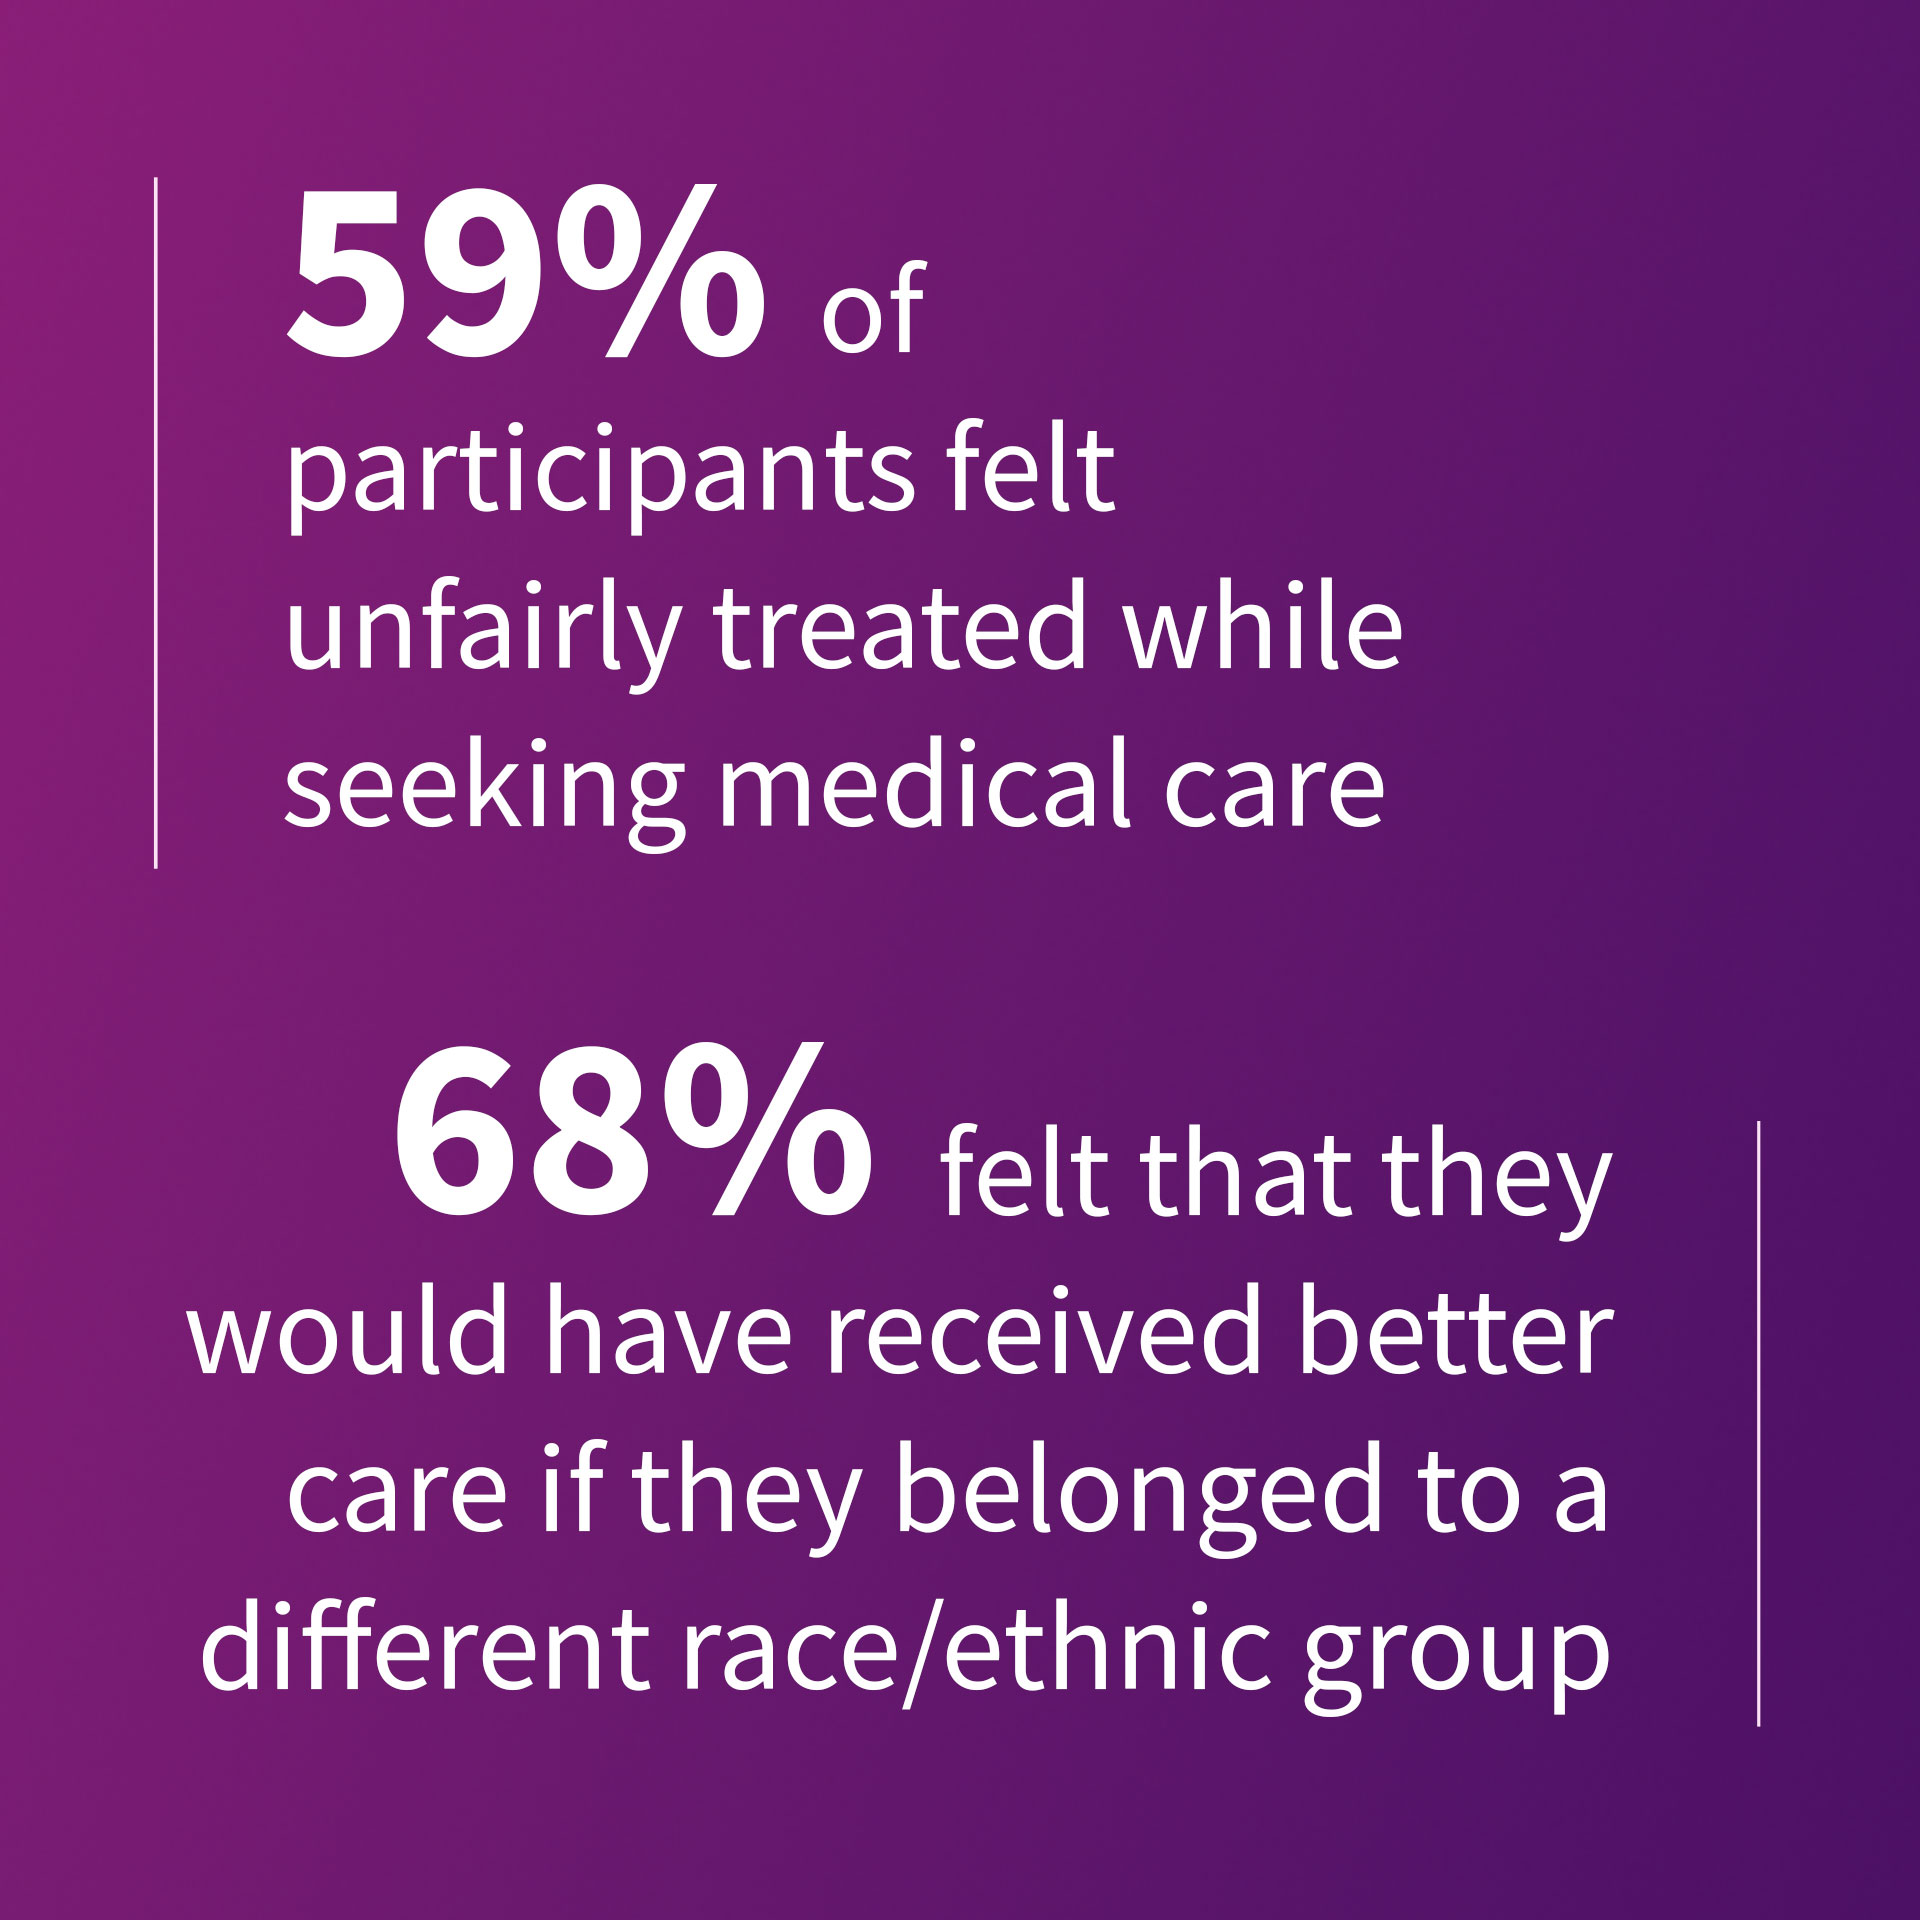 An infographic with white text on a purple background reading "59% of participants felt unfairly treated while seeking medical care. 68% felt that they would have received better care if they belonged to a different race or ethnic group."